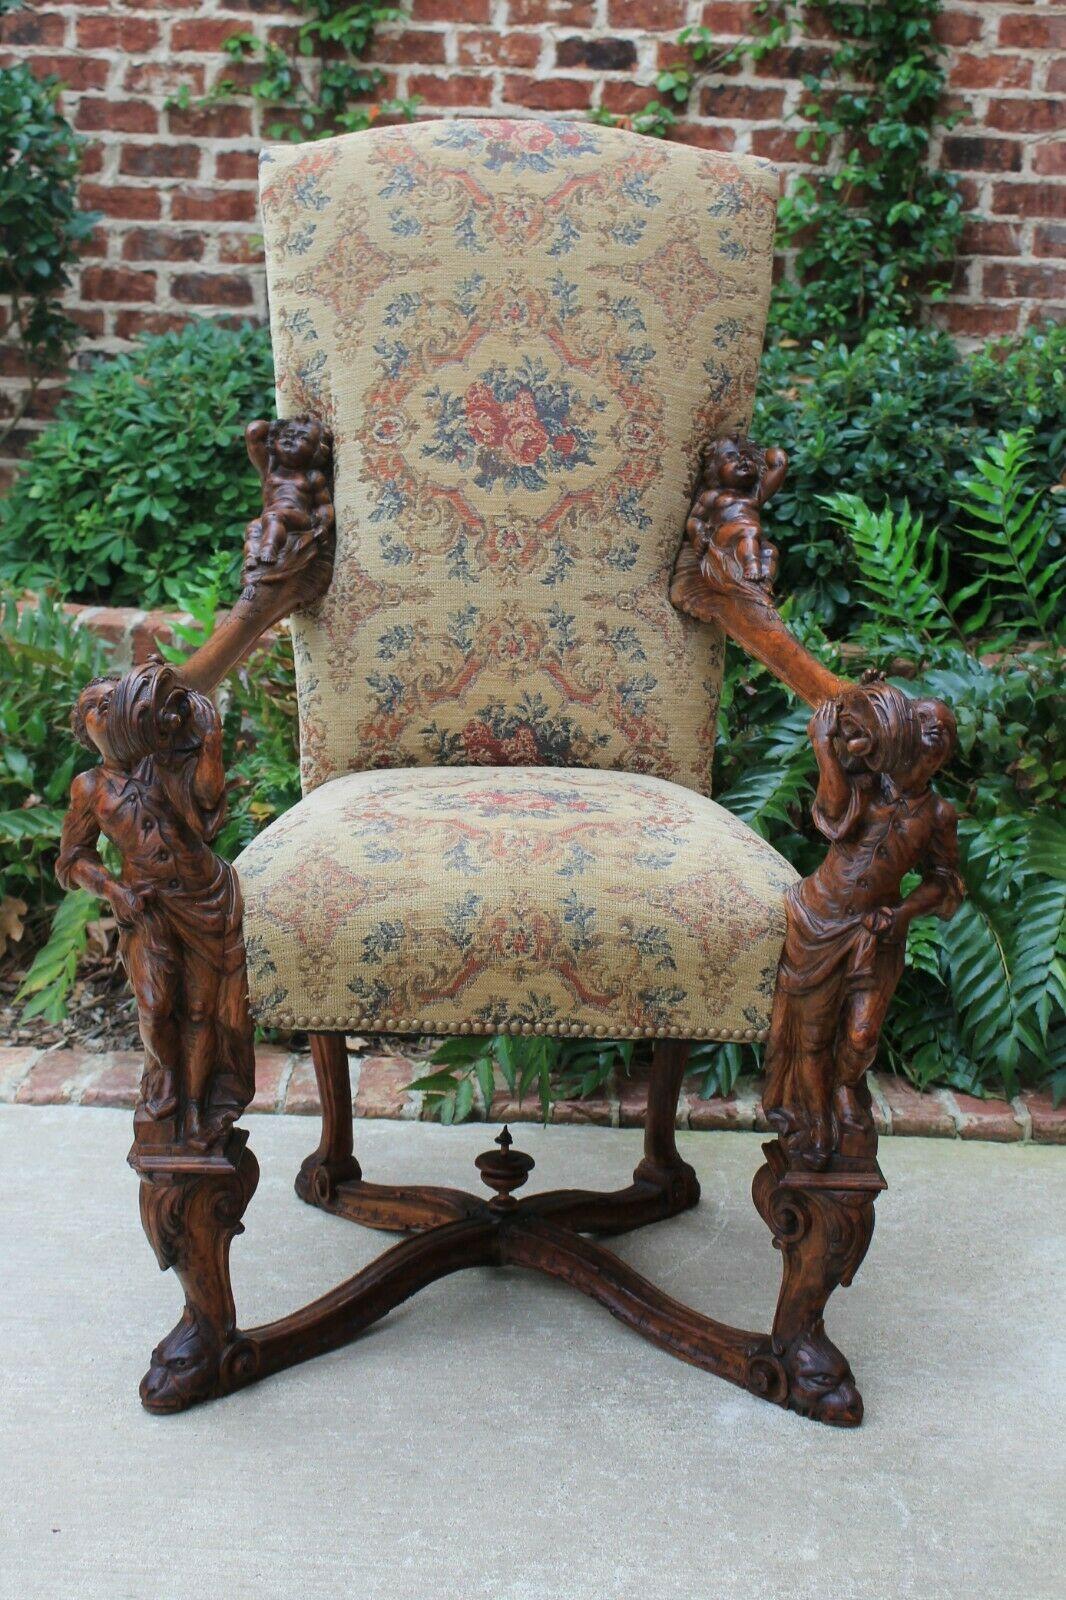 Antique Italian Besarel Walnut Arm Chair Baroque Upholstered Mid-19th C Rare For Sale 1